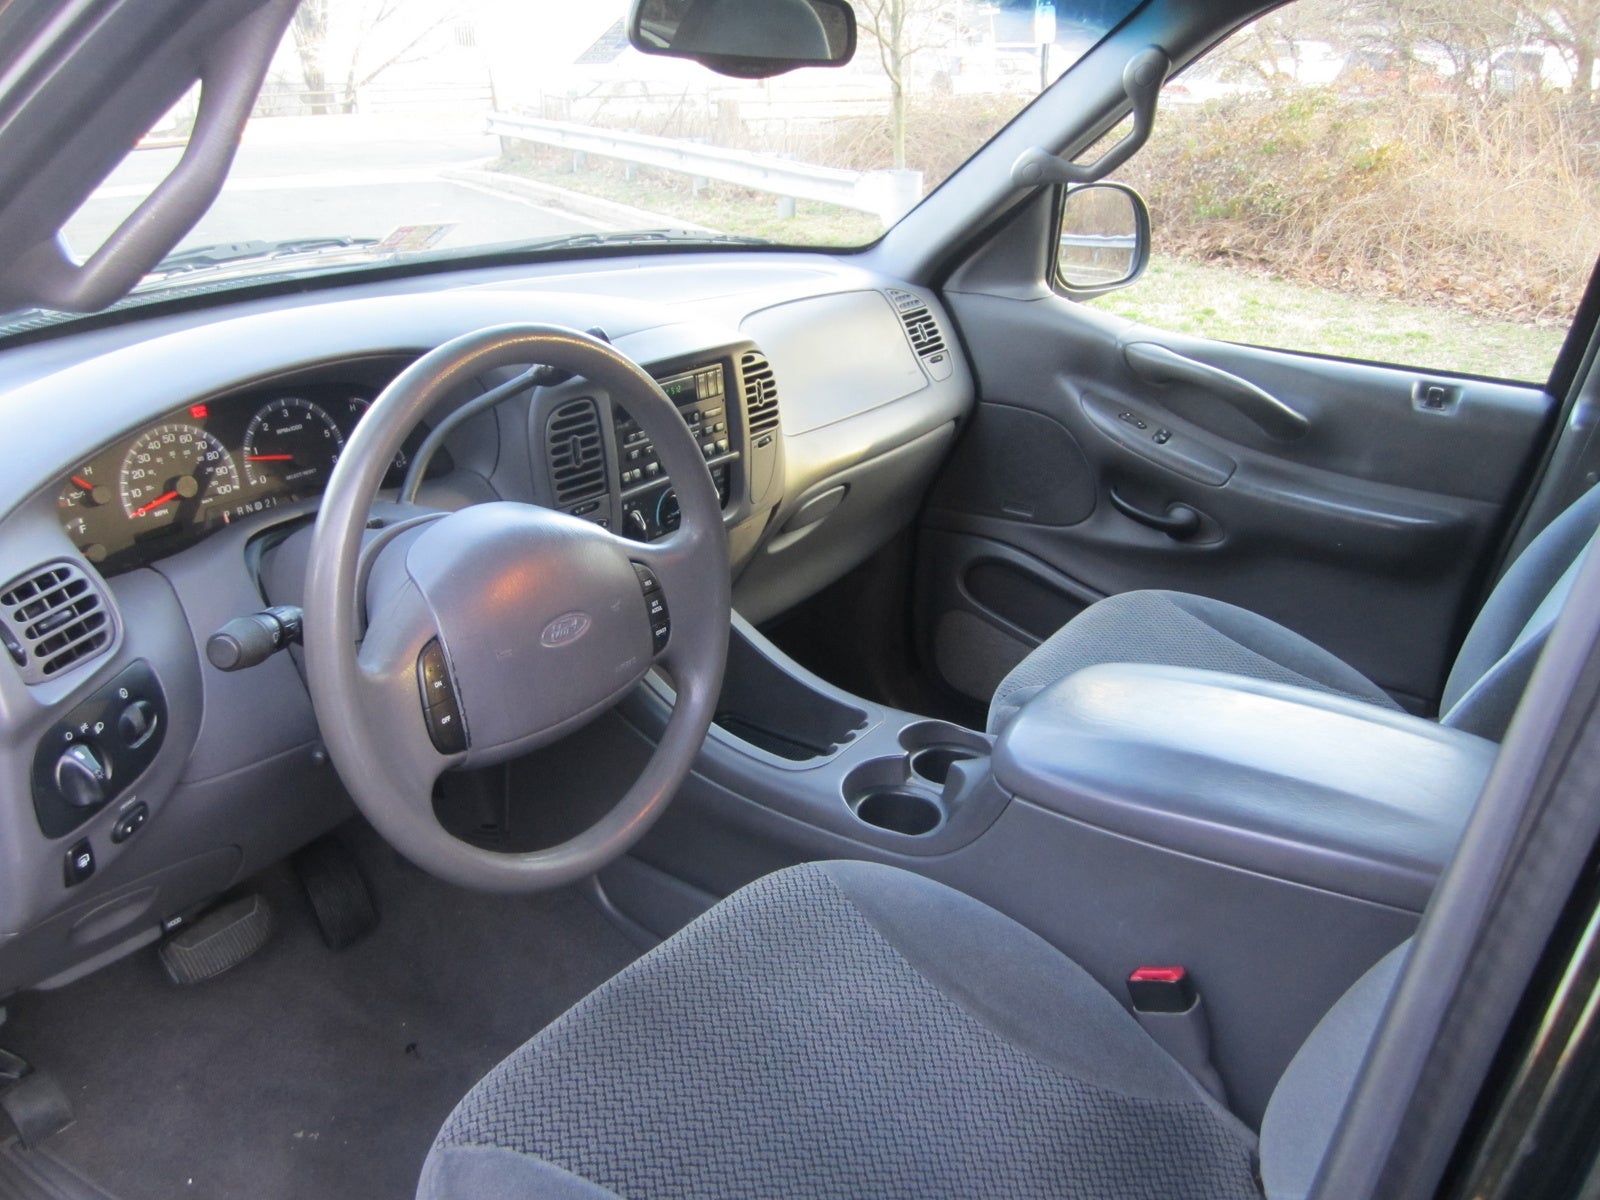 2000 Ford expedition interior dimensions #2